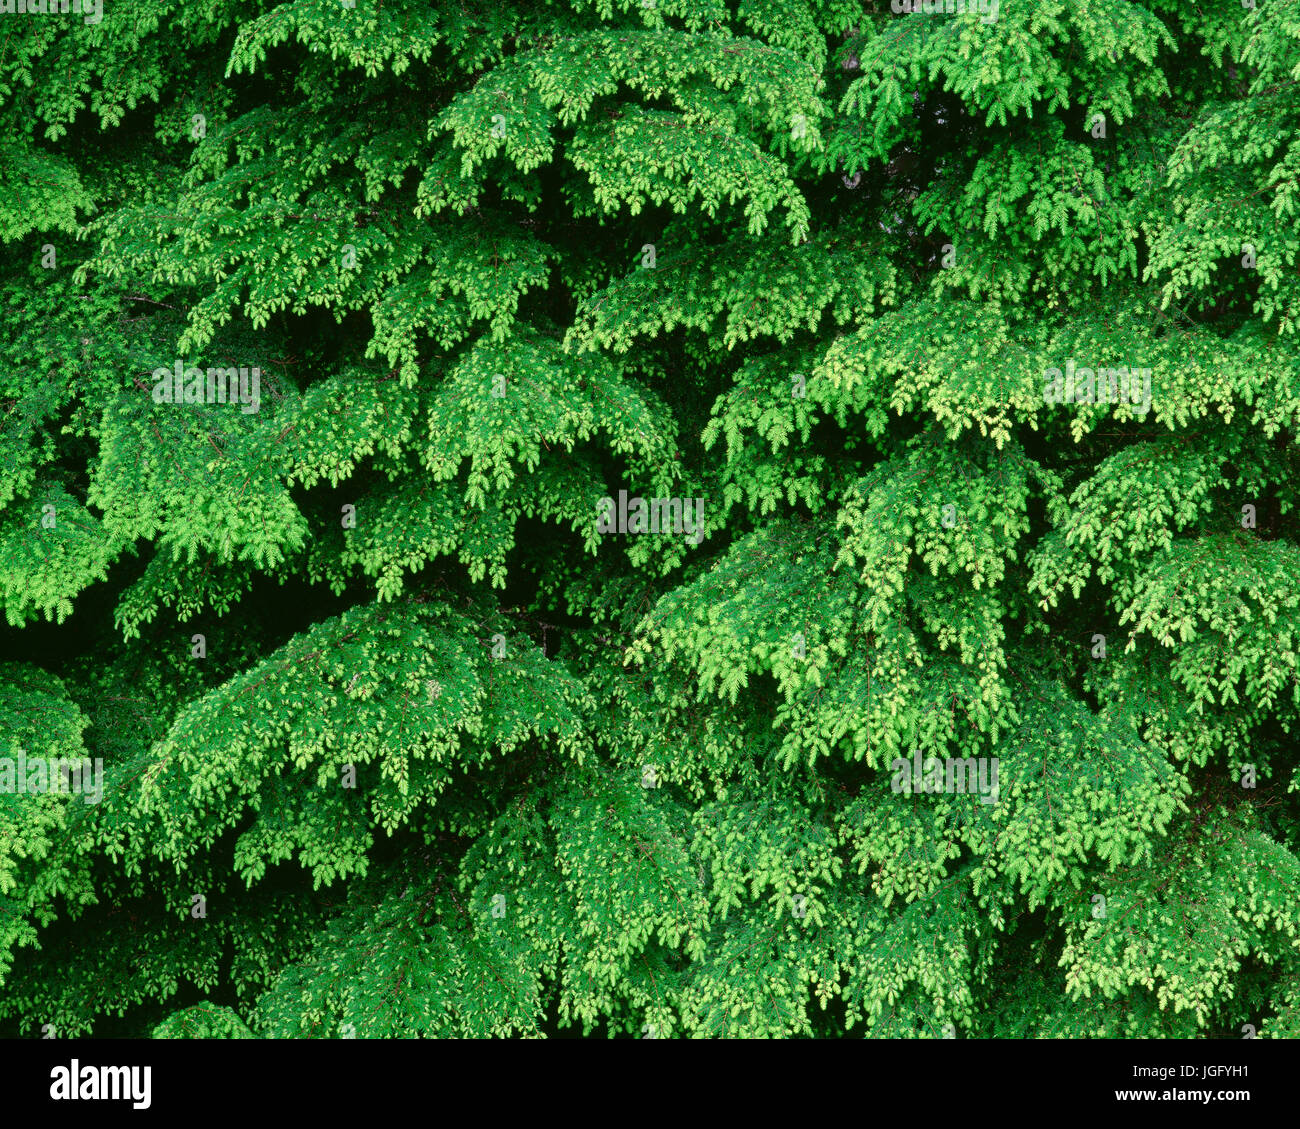 USA, Oregon, Willamette National Forest, New spring growth of western hemlock trees. Stock Photo